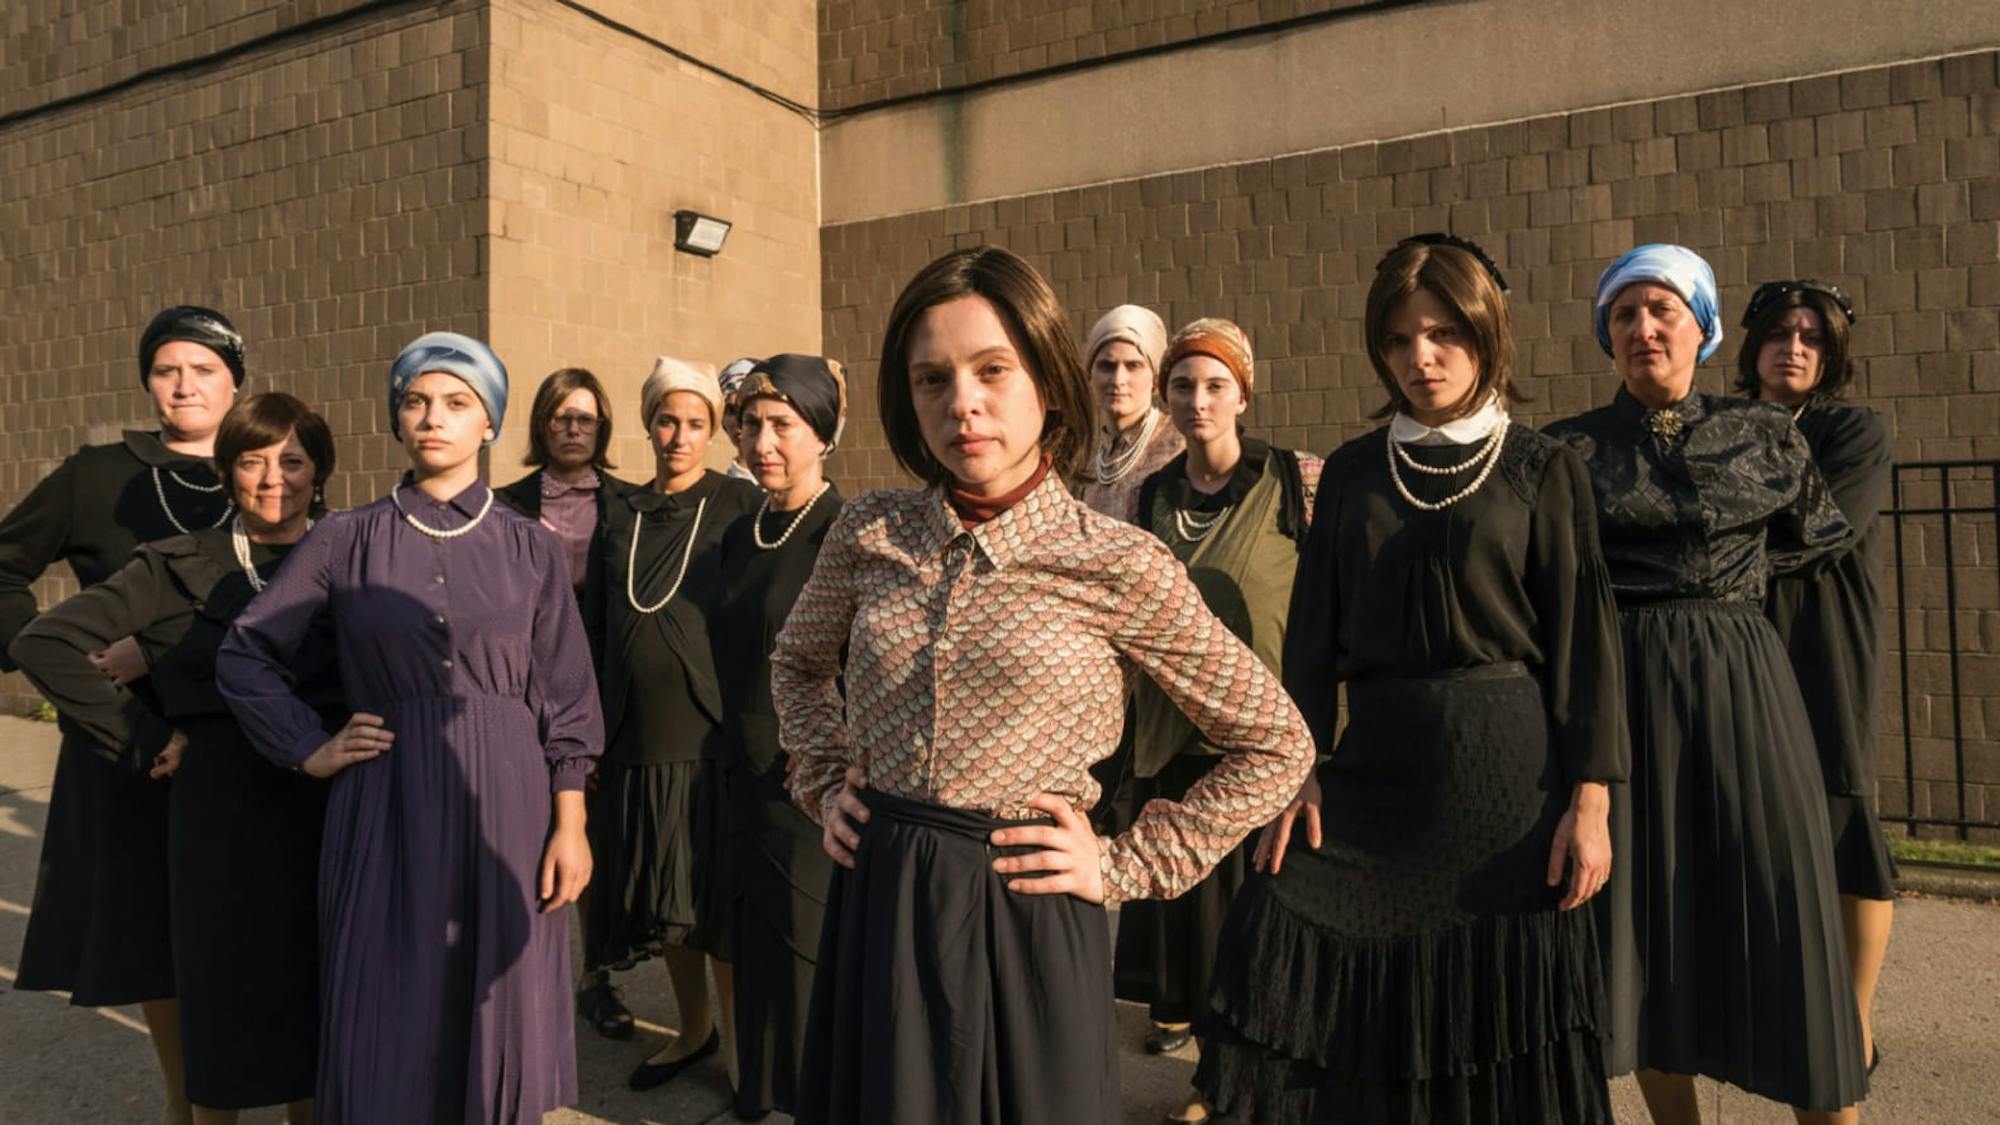 Shira Haas and her fellow Unorthodox actresses